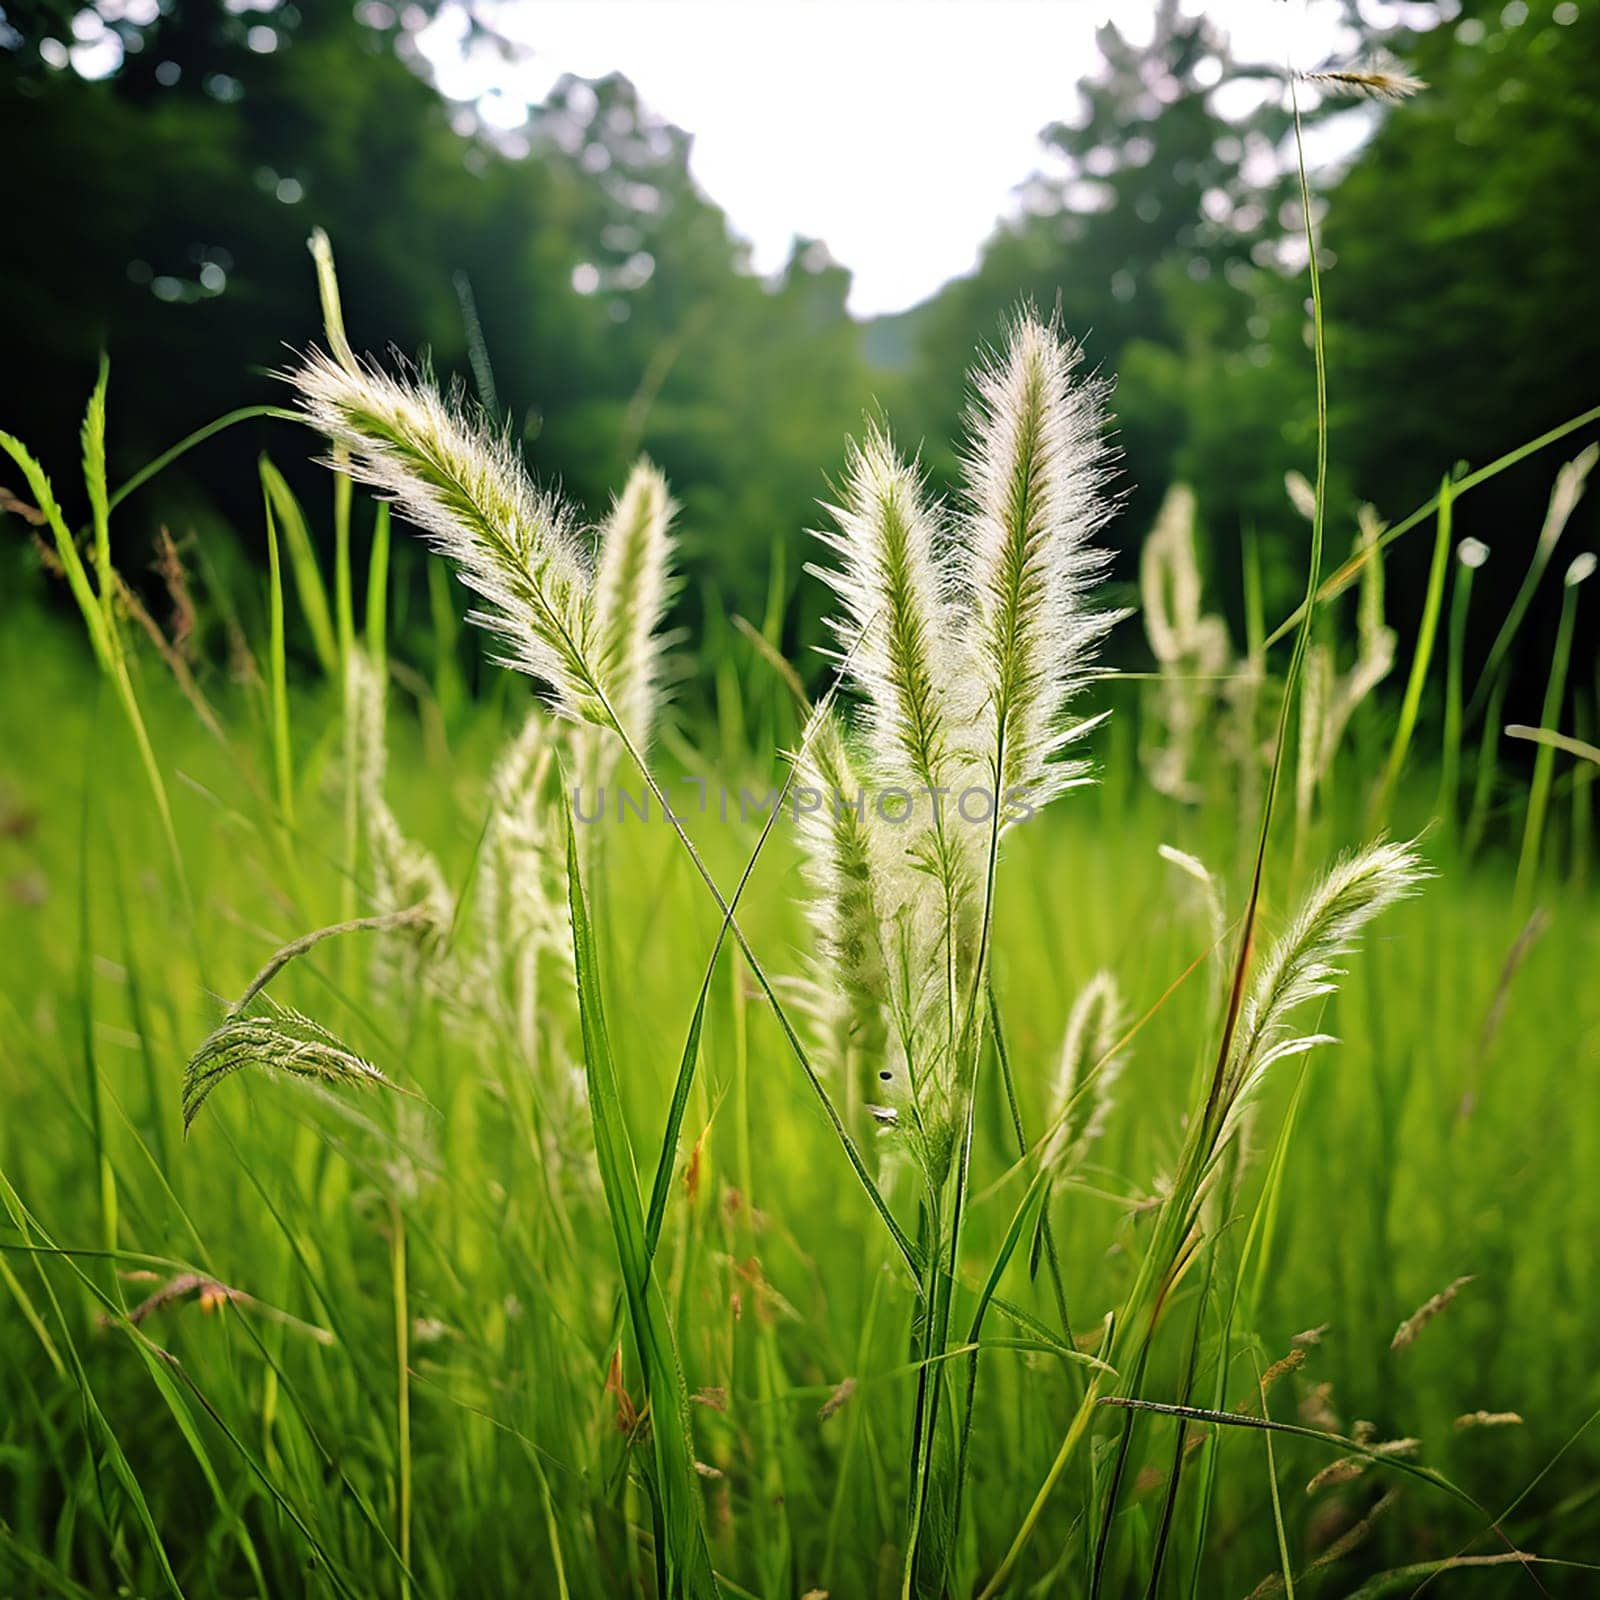 Graceful Elegance: Sunlight and Dancing Wildgrass in a Scenic Meadow by Petrichor